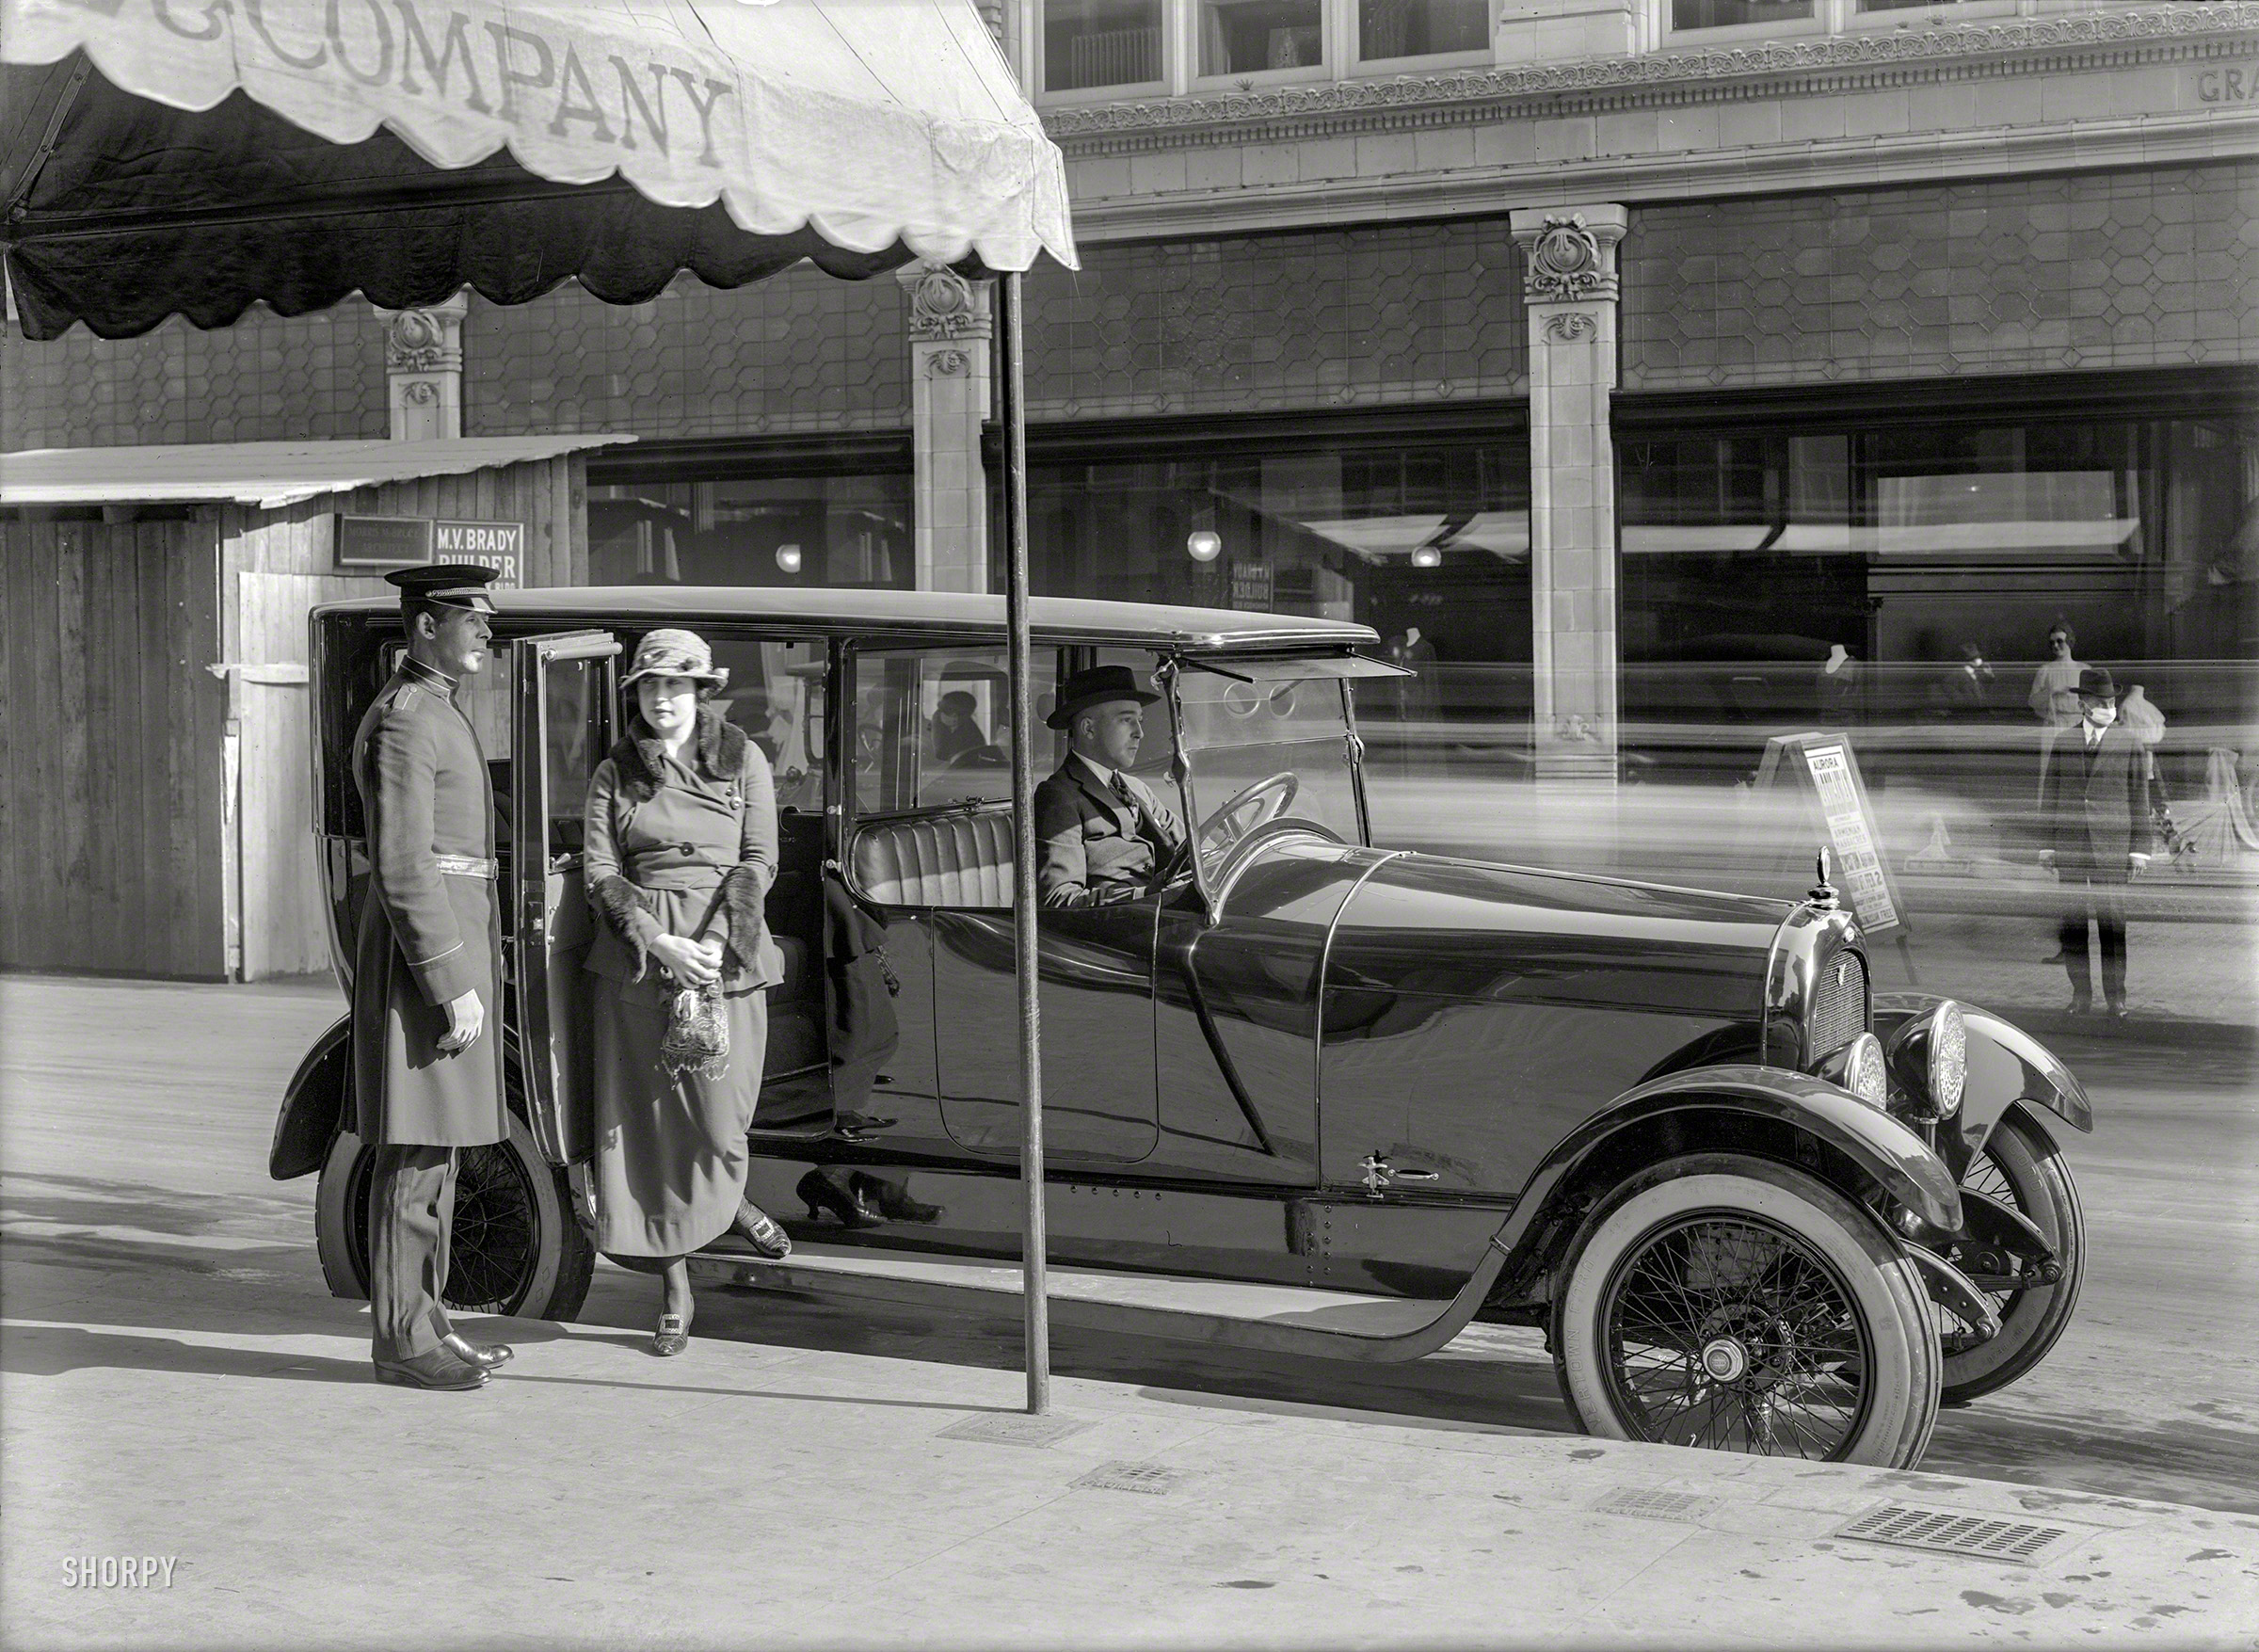 Somewhere in San Francisco circa 1919. "Woman alighting from Marmon limousine." At first this would seem to be all about the car, until we notice the pedestrian with the influenza face mask, and sign advertising what seems to be an appearance by the actress Aurora Mardiganian in connection with ARMENIAN MASSACRES. 5x7 glass negative by Christopher Helin. View full size.